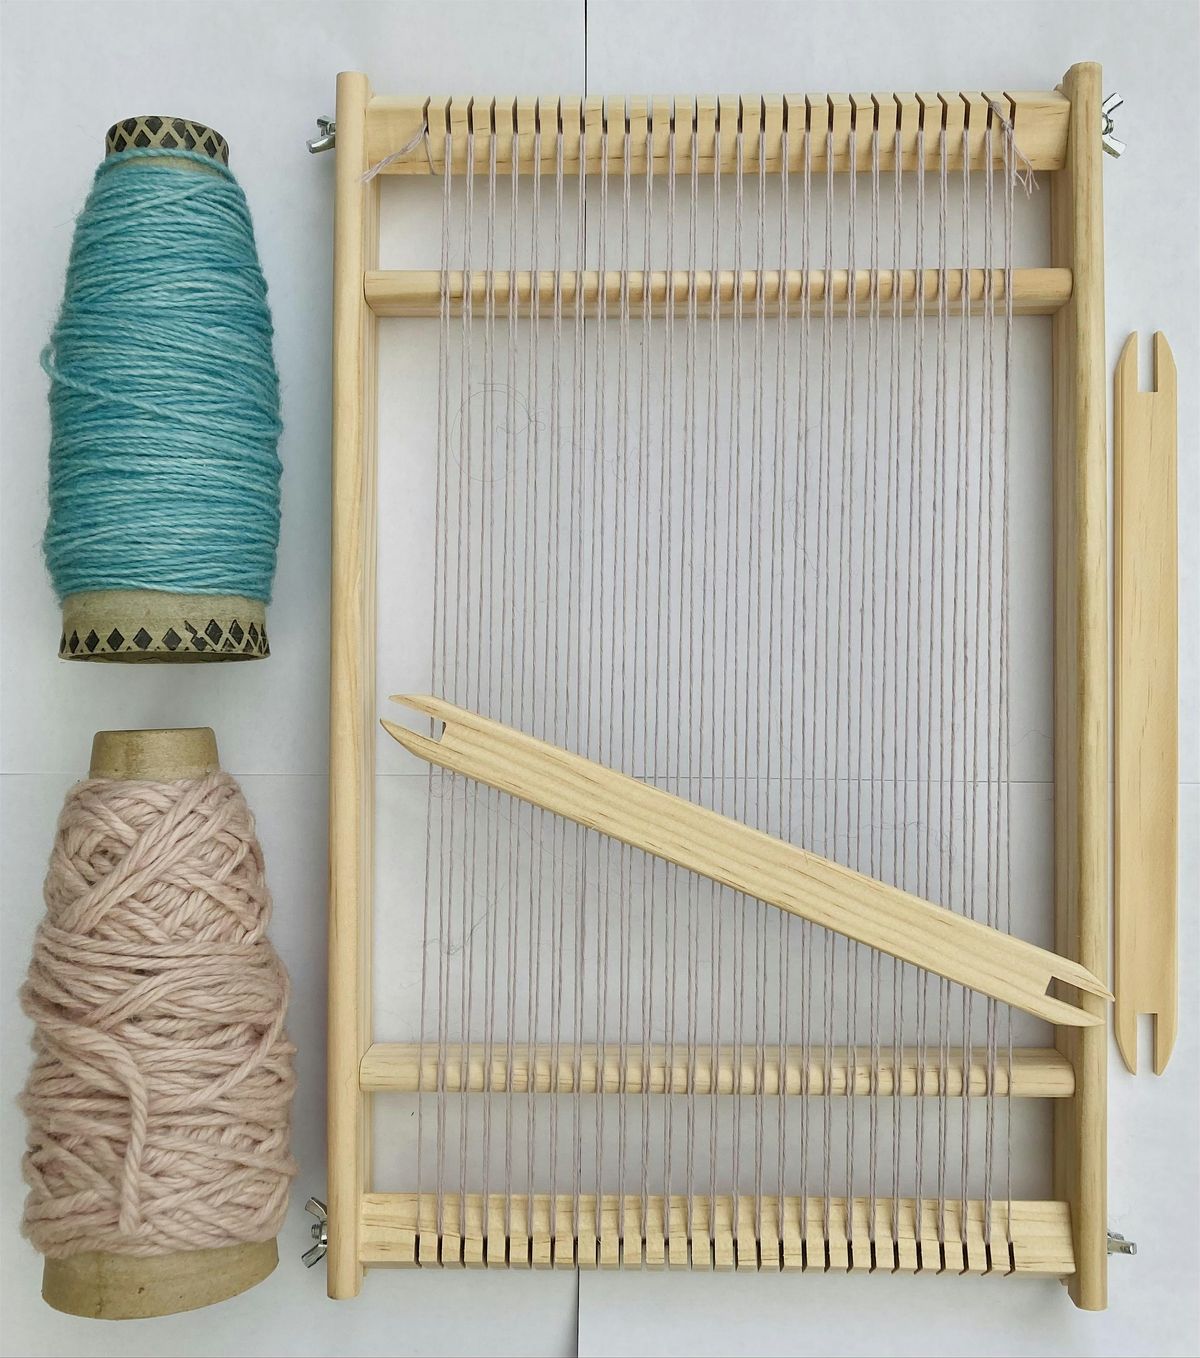 Introduction to Frame Loom Weaving with Jessica Cutler